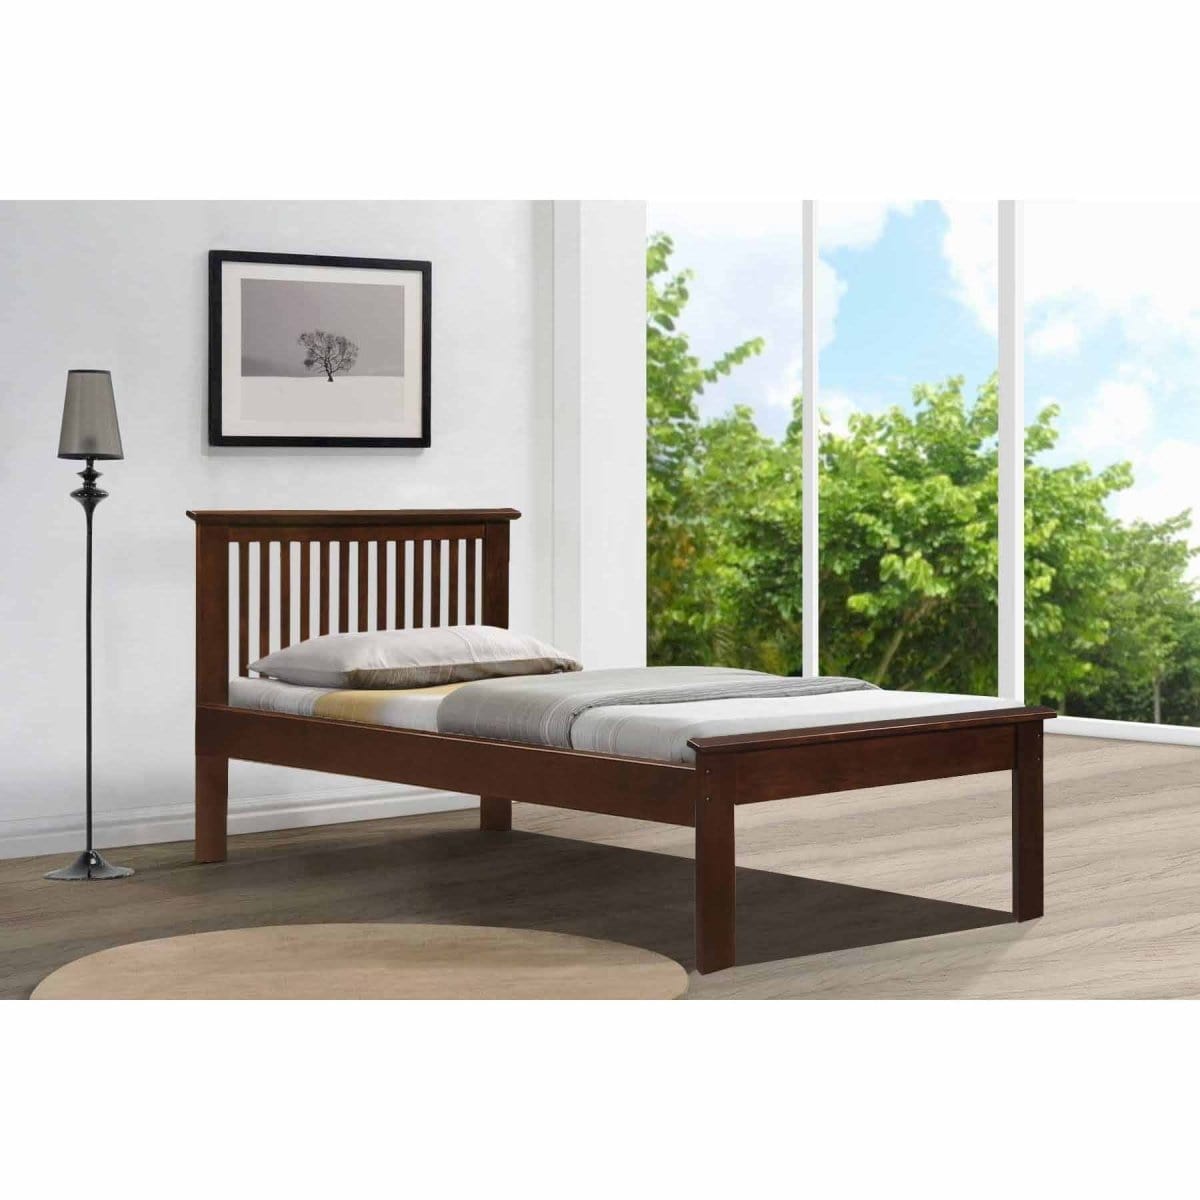 #1   Mission XII Solid Wood Single Bed picket and rail